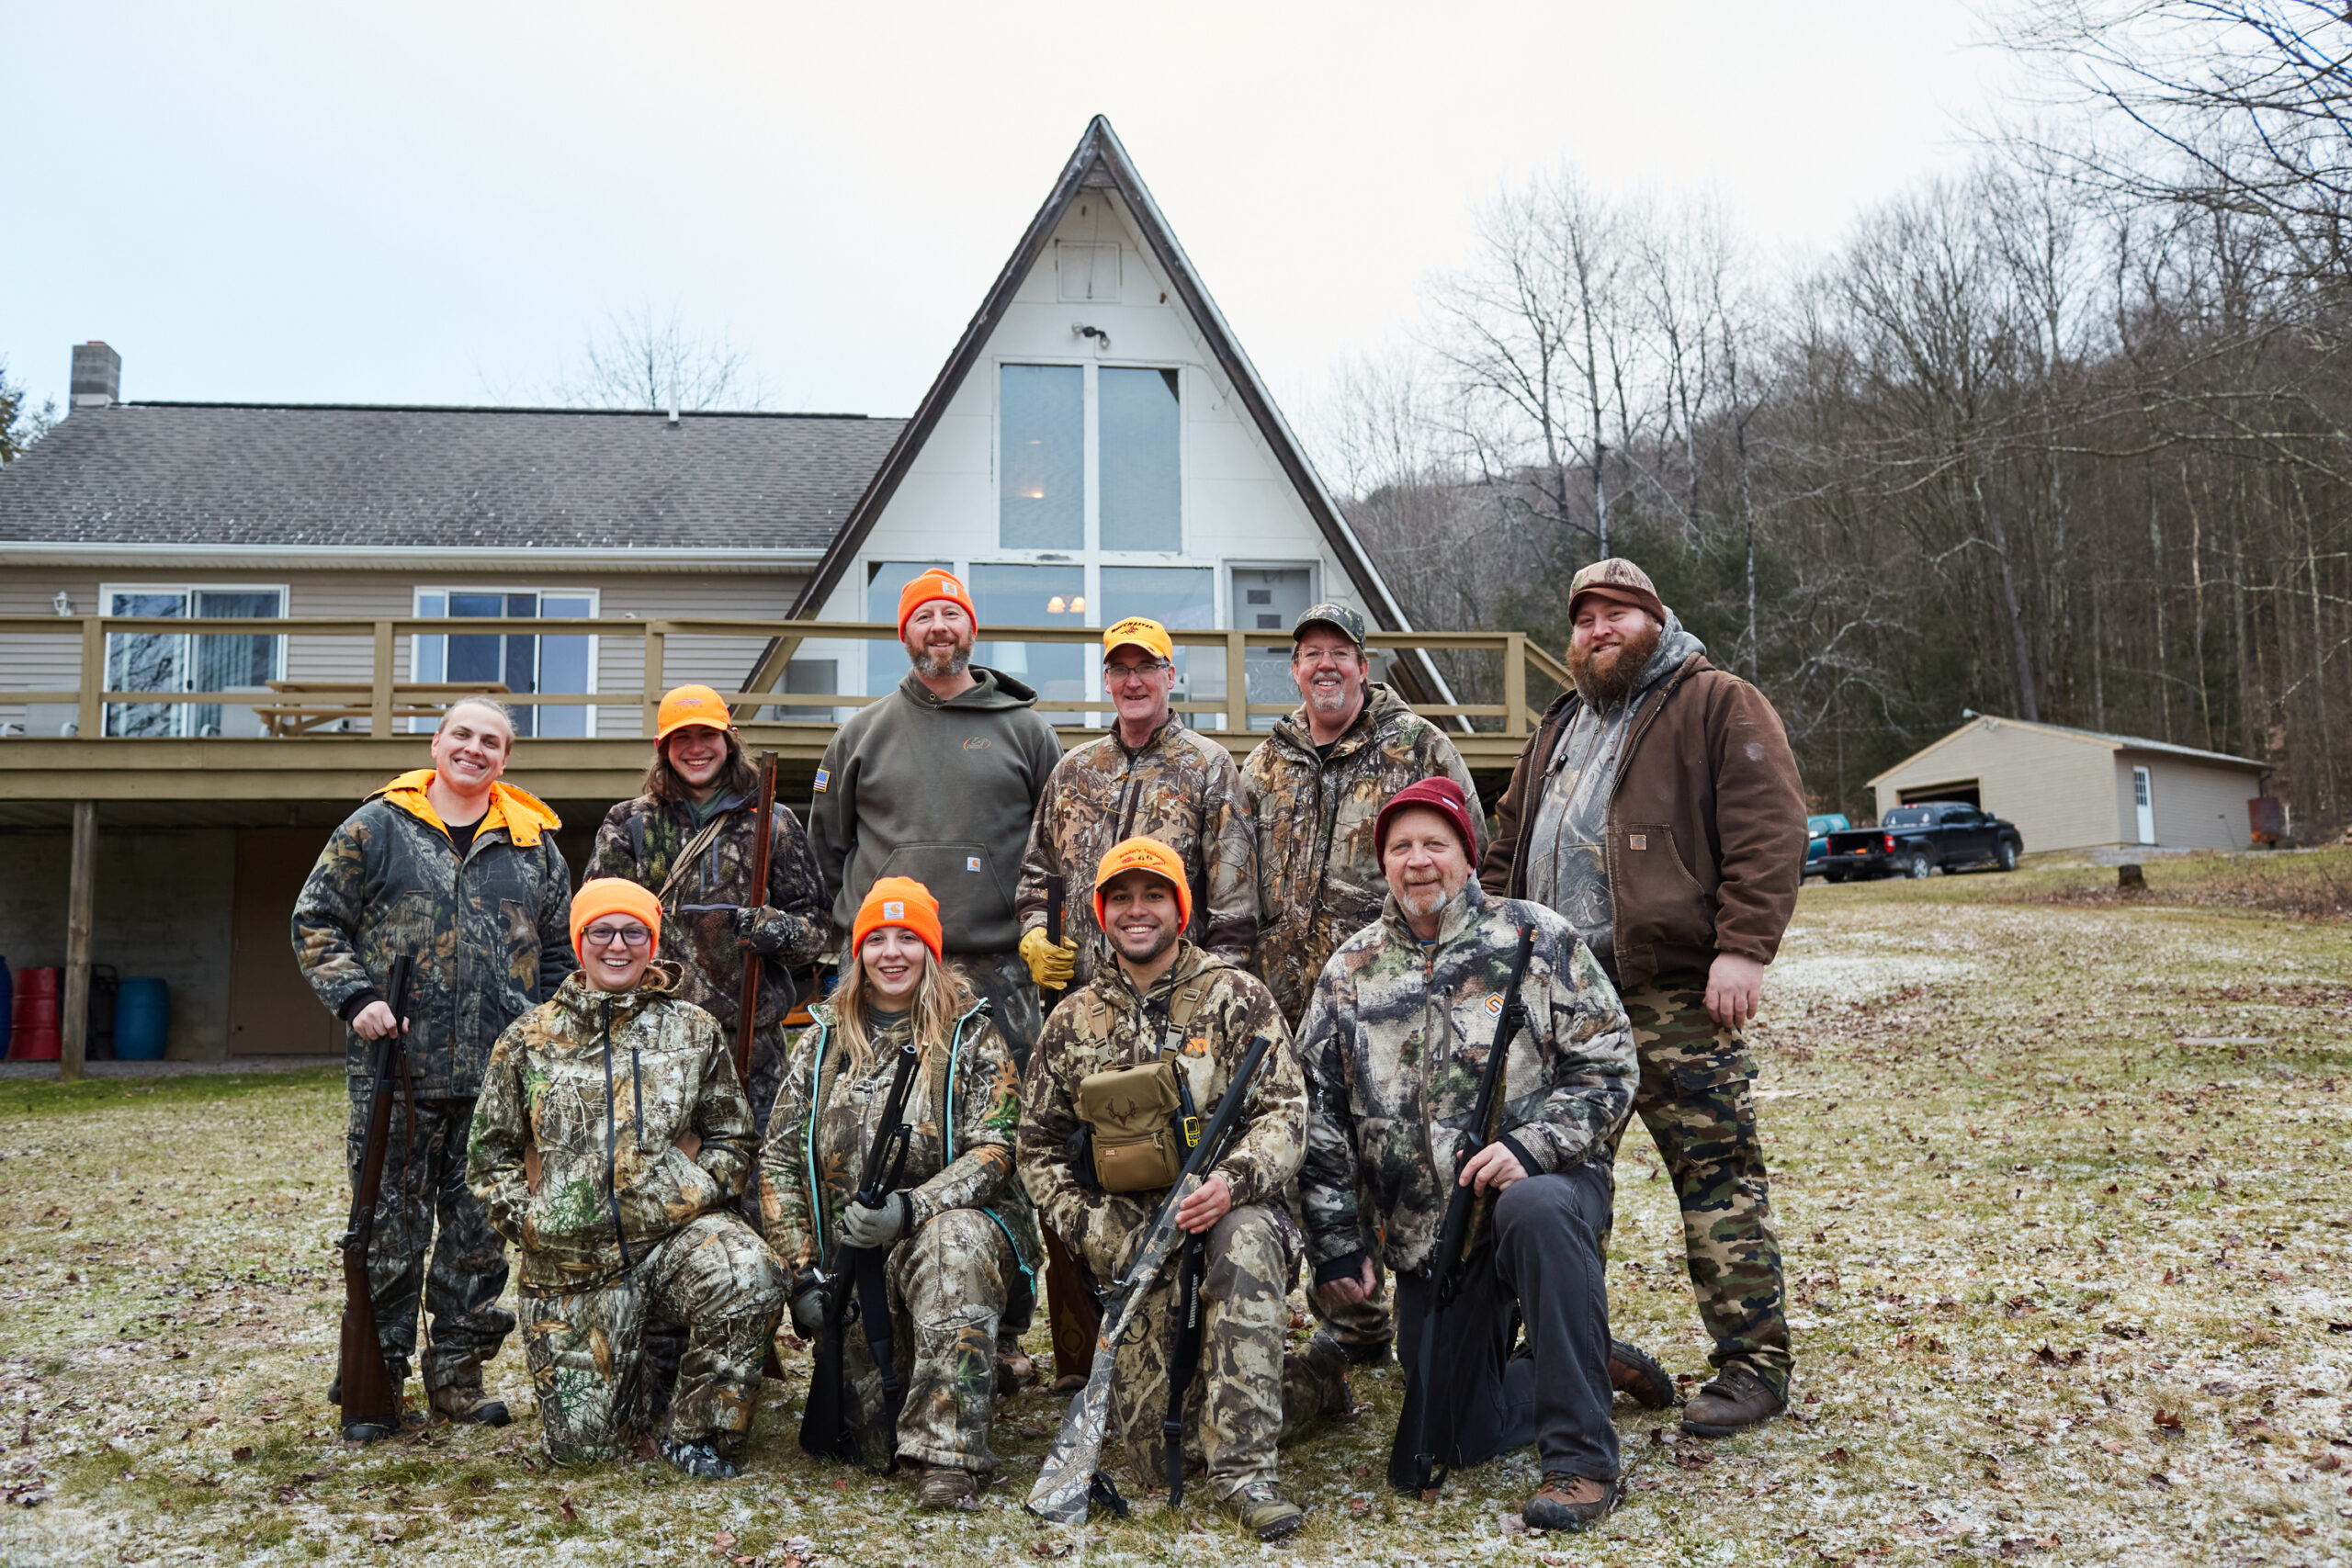 Posing for a camp bulletin-board photo. While this year’s deer drives didn’t produce any filled tags (for our crew), it helped keep the tradition of Pennsylvania flintlock hunting alive and well. Zac Clark (back row, far right) is our crew's outlier for flintlock success: He’s tagged 15 deer in 20 flintlock seasons. The hunt always fell during winter break in high school and college, when he was able to spend the most time in the woods. “I’ve killed more deer with my flintlock than any other weapon,” says Clark, 32. “I love hunting this time of year. I look forward to these three weeks all year, and once the season kicks off, I make the most of every second.” 

From left, front row: Whitney Strosser, Madalynn Talerico, the author, and Dean Severson. From left, back row: Austin Strosser, Brayden March, Dave Steele, Steve Waldman, Kurt Westbrook, and Clark. 